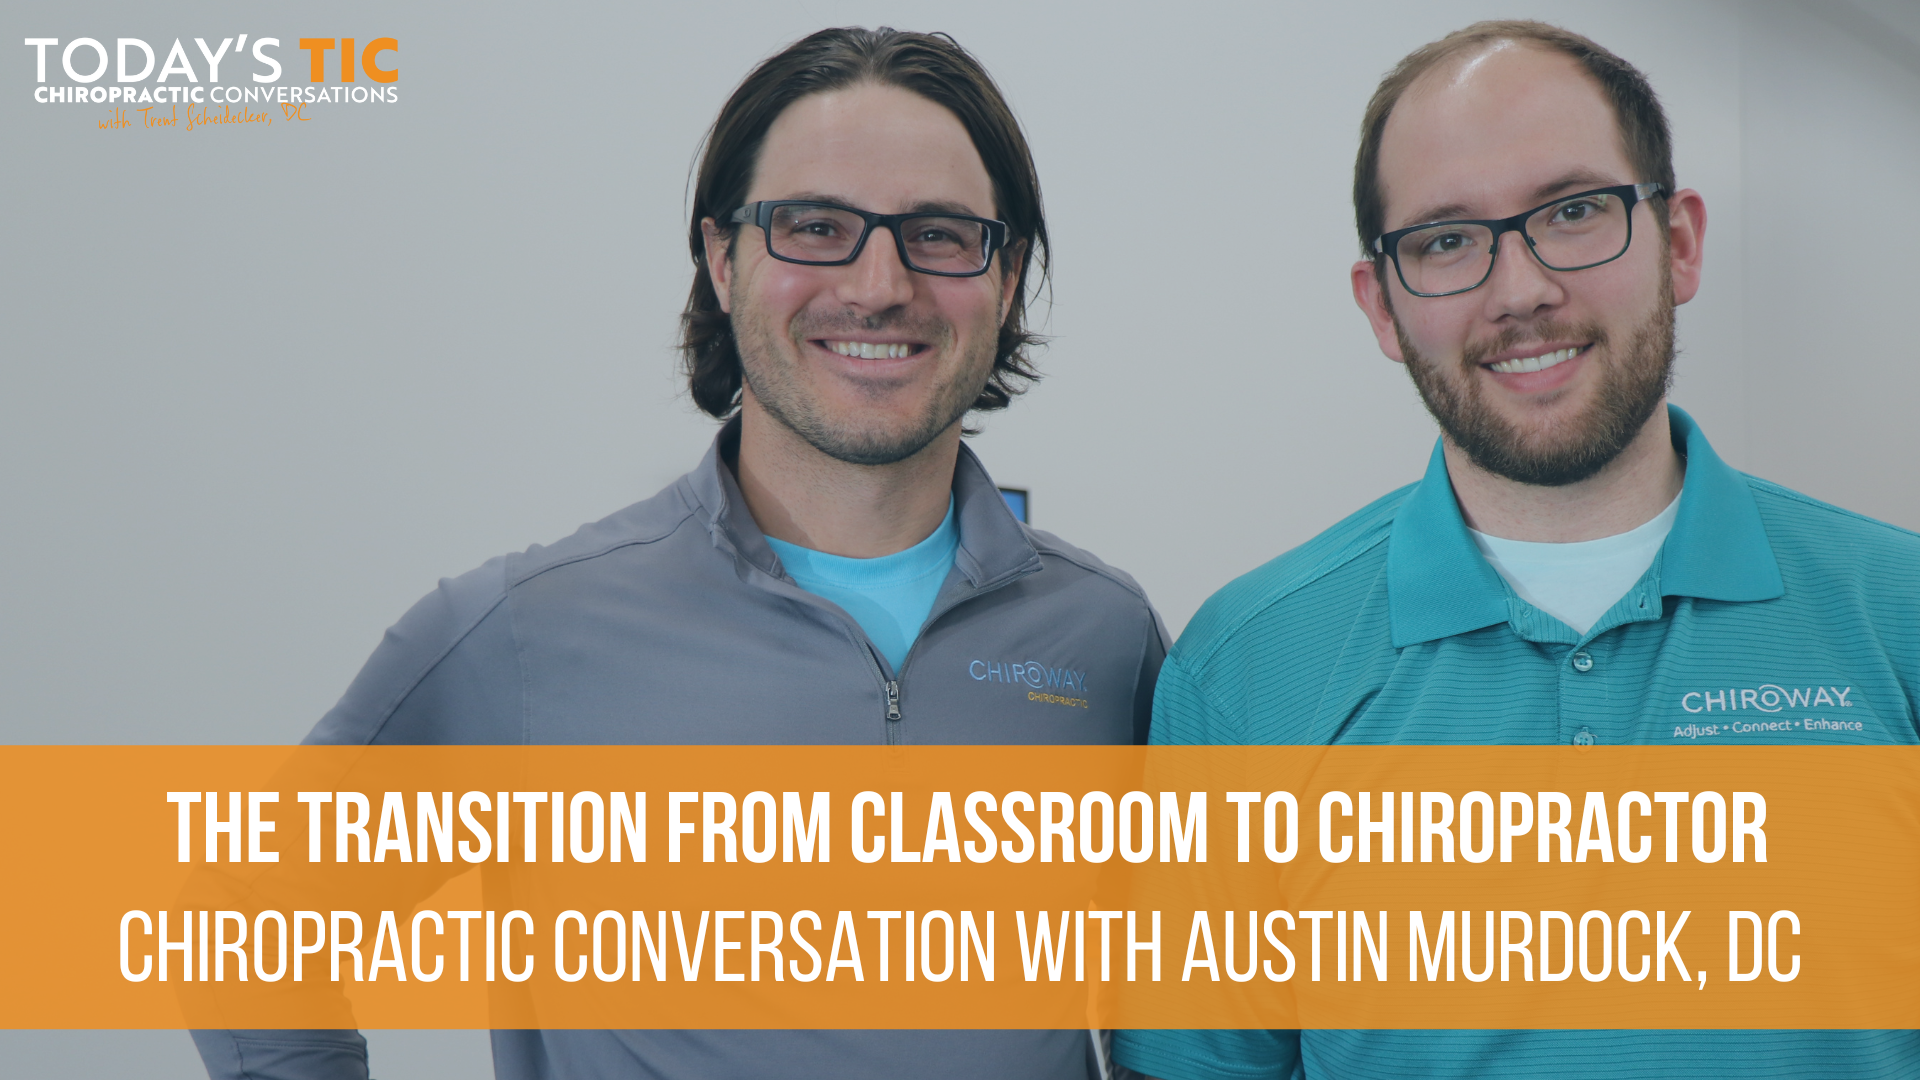 Chiropractic Conversations The Transition from Classroom to Chiropractor